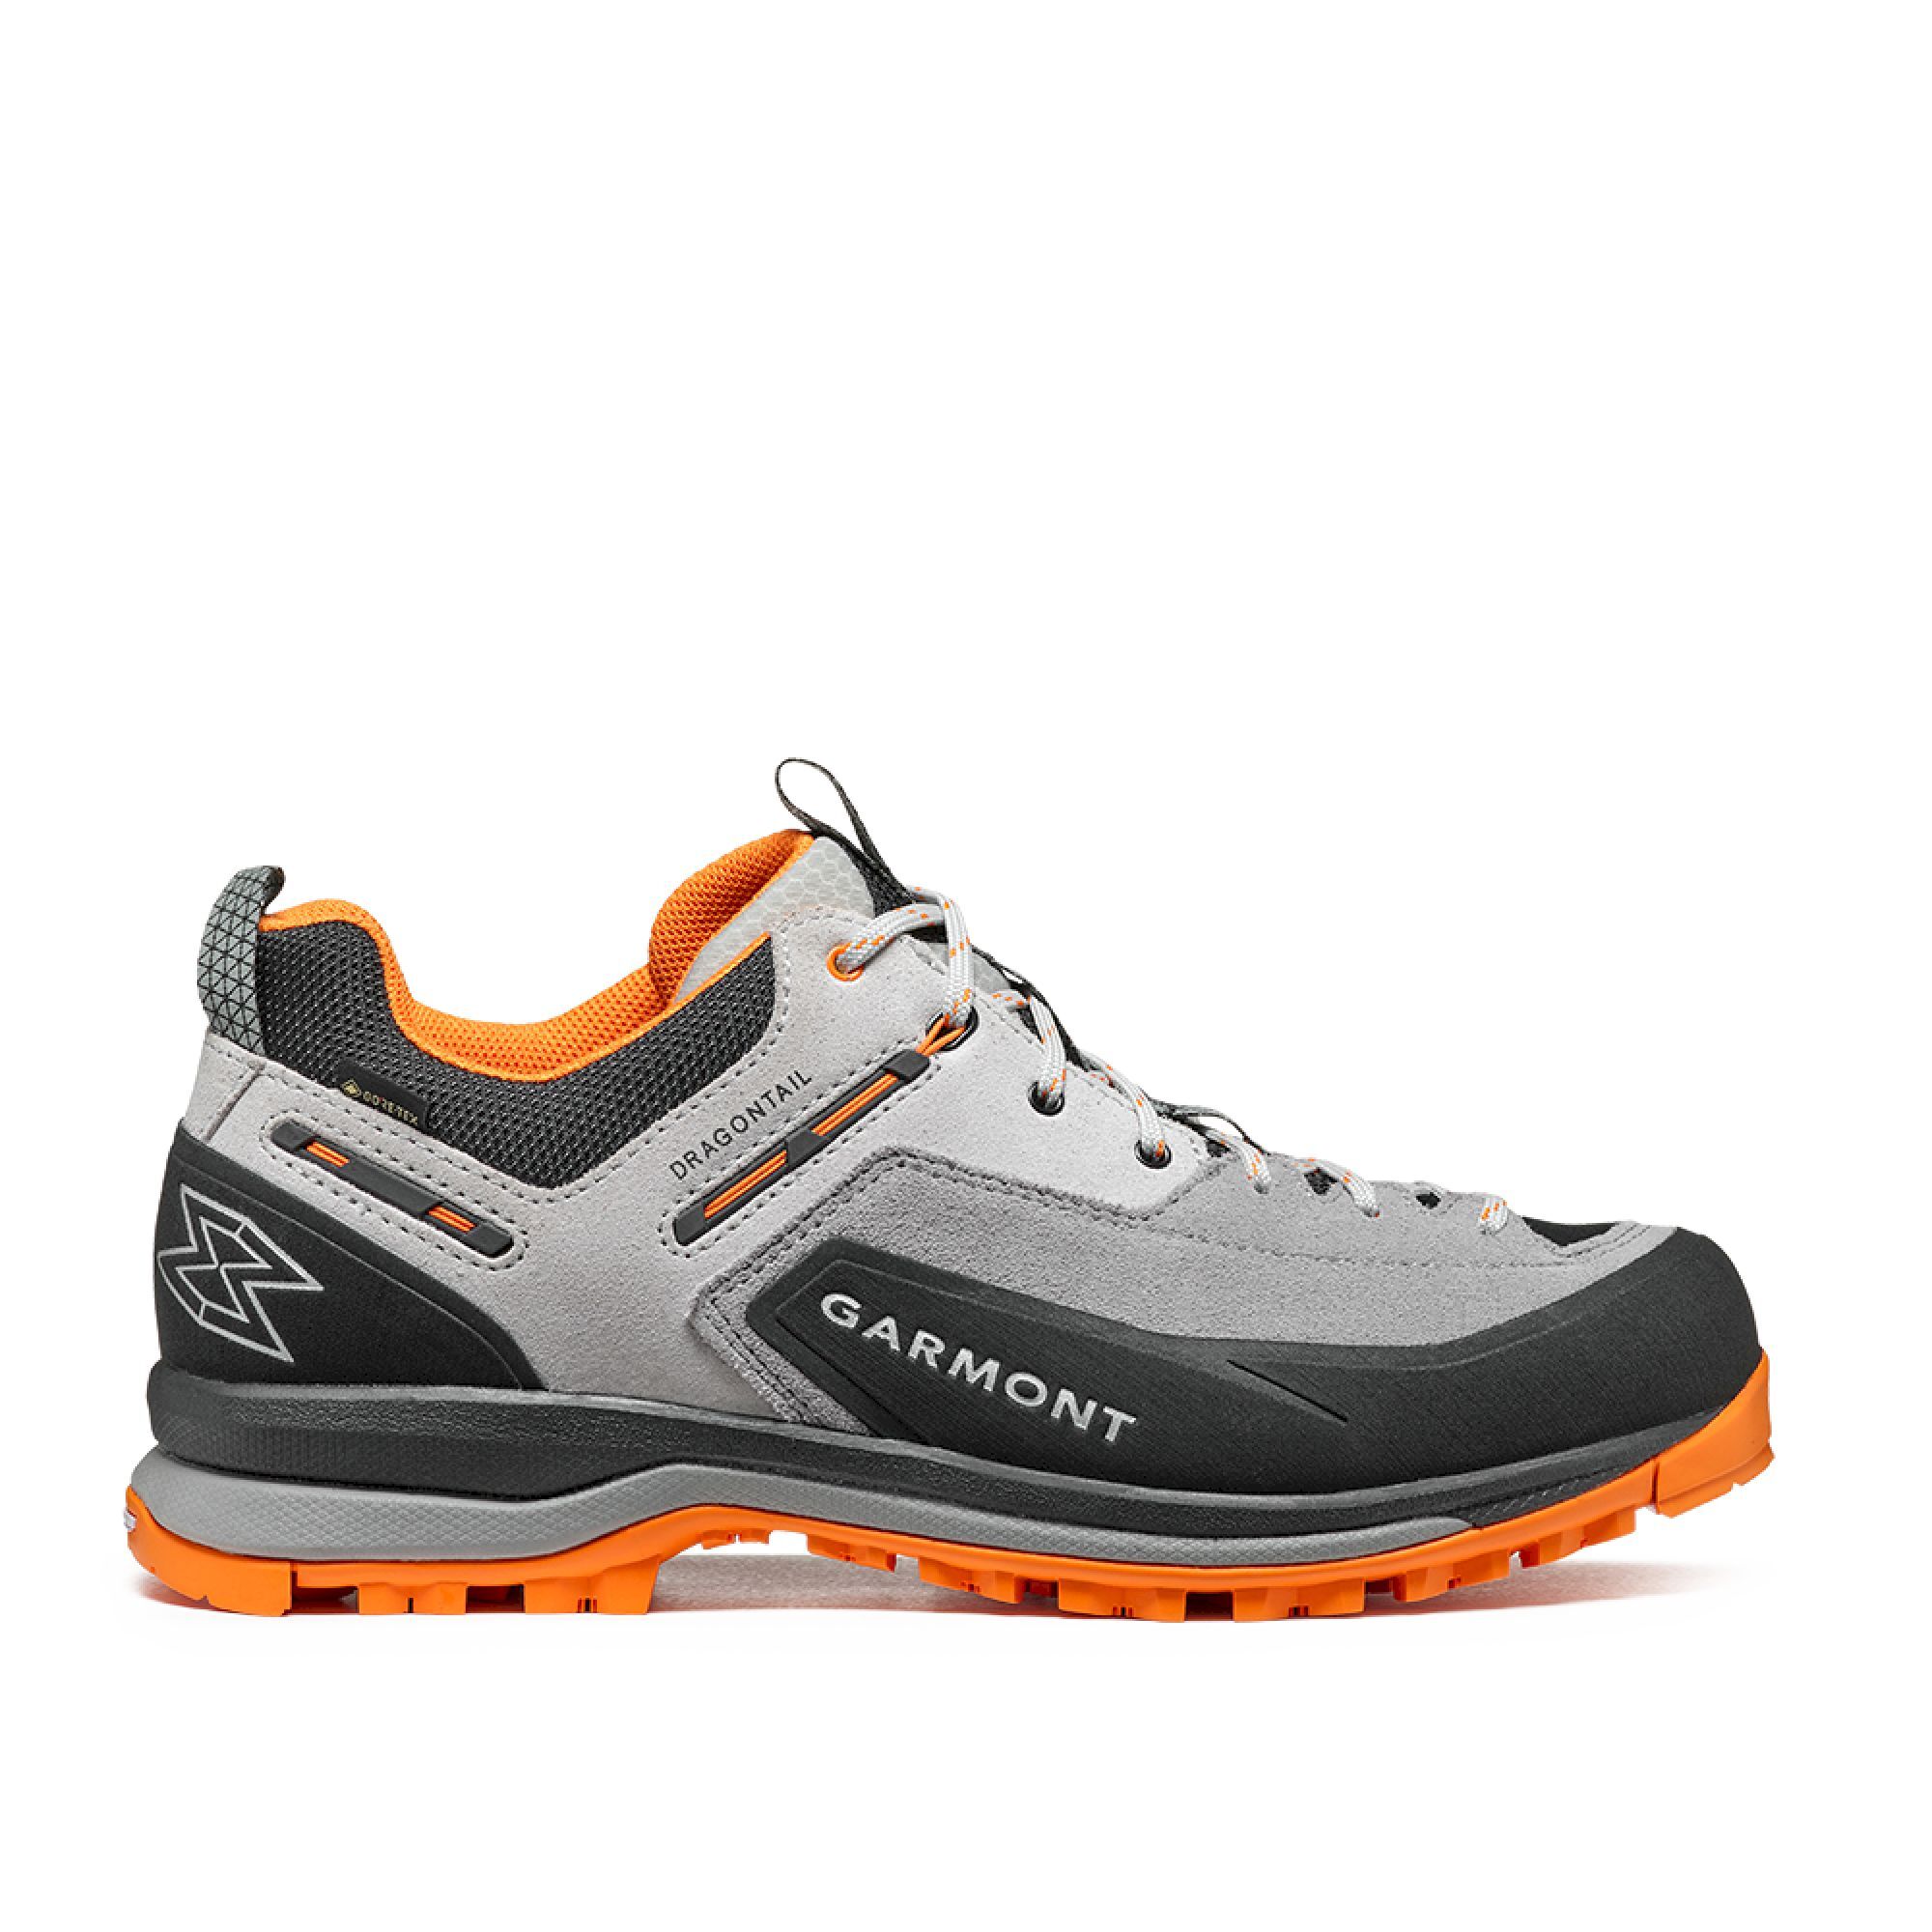 Garmont Dragontail Tech GTX - Limited Edition - Approach shoes | Hardloop